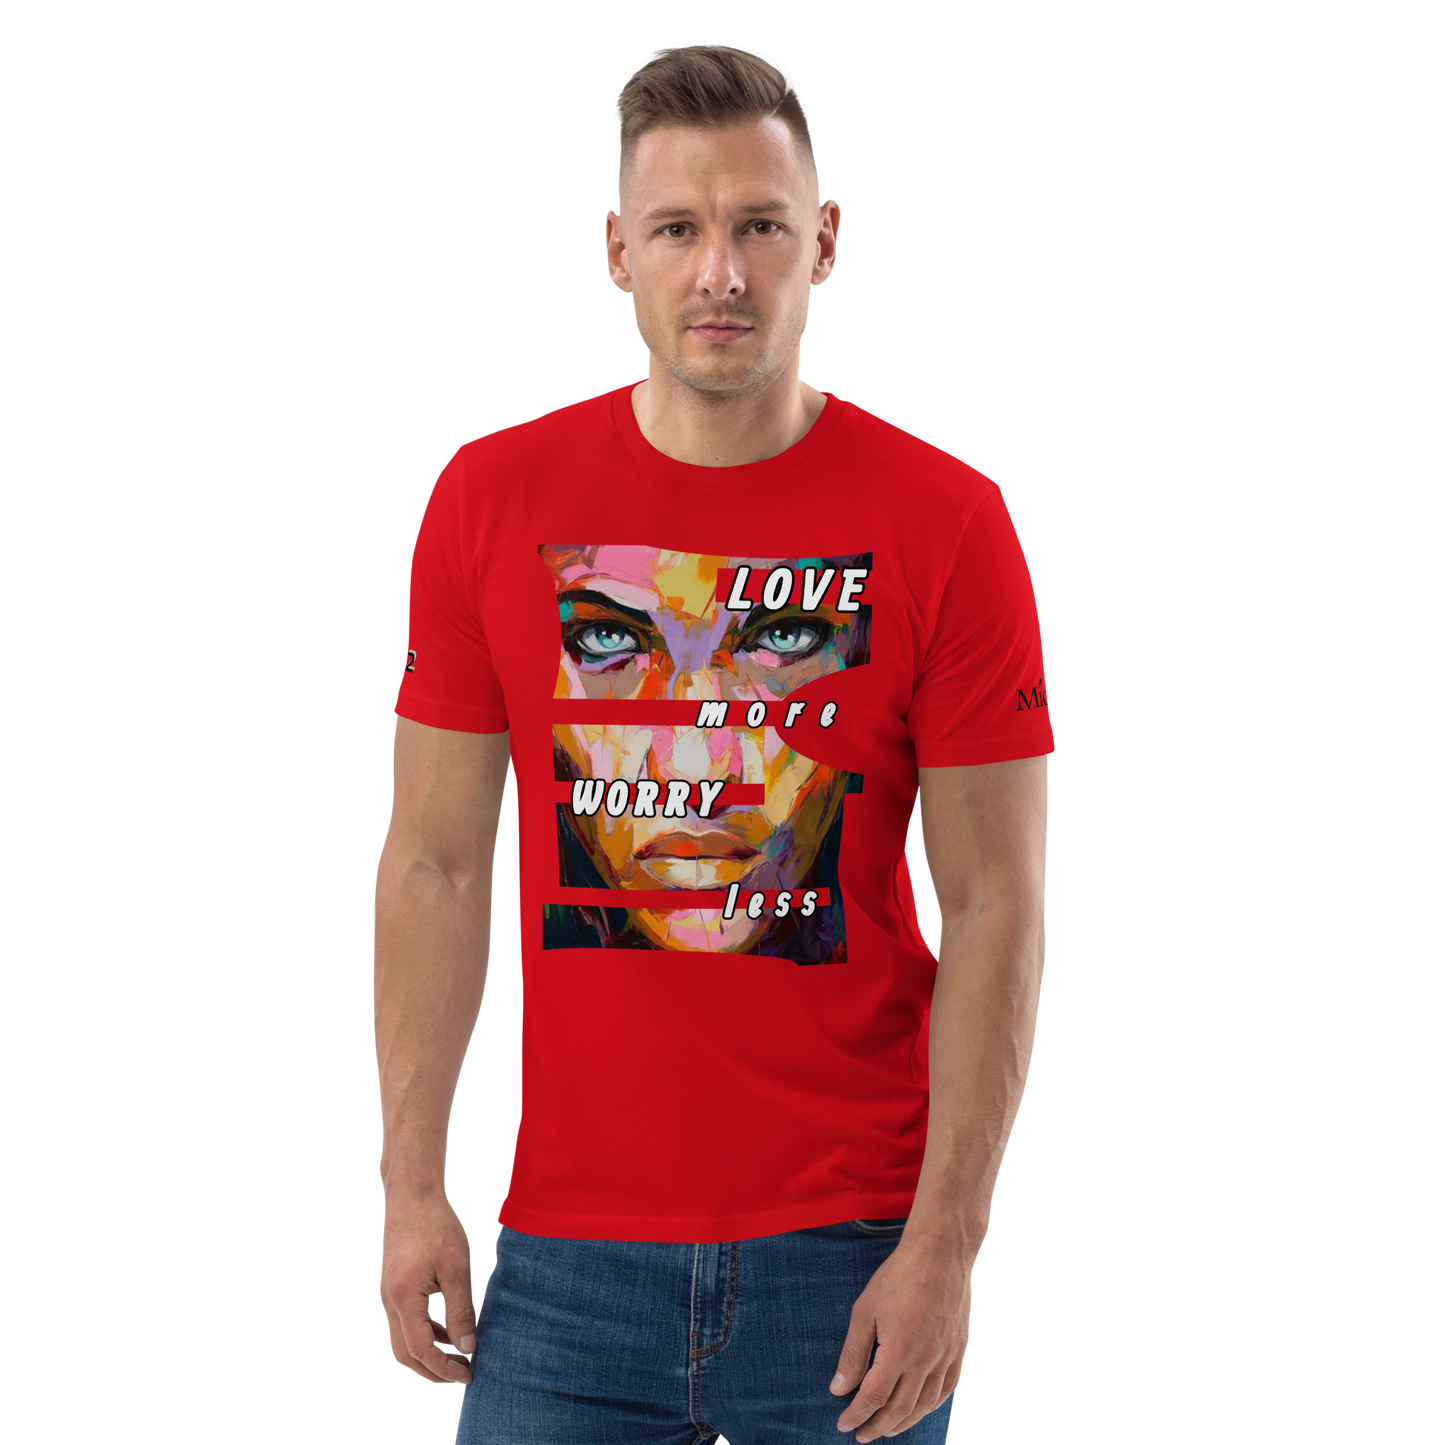 Unisex T-Shirt Red-Line No.149 "1 of 20K" by MioLeo